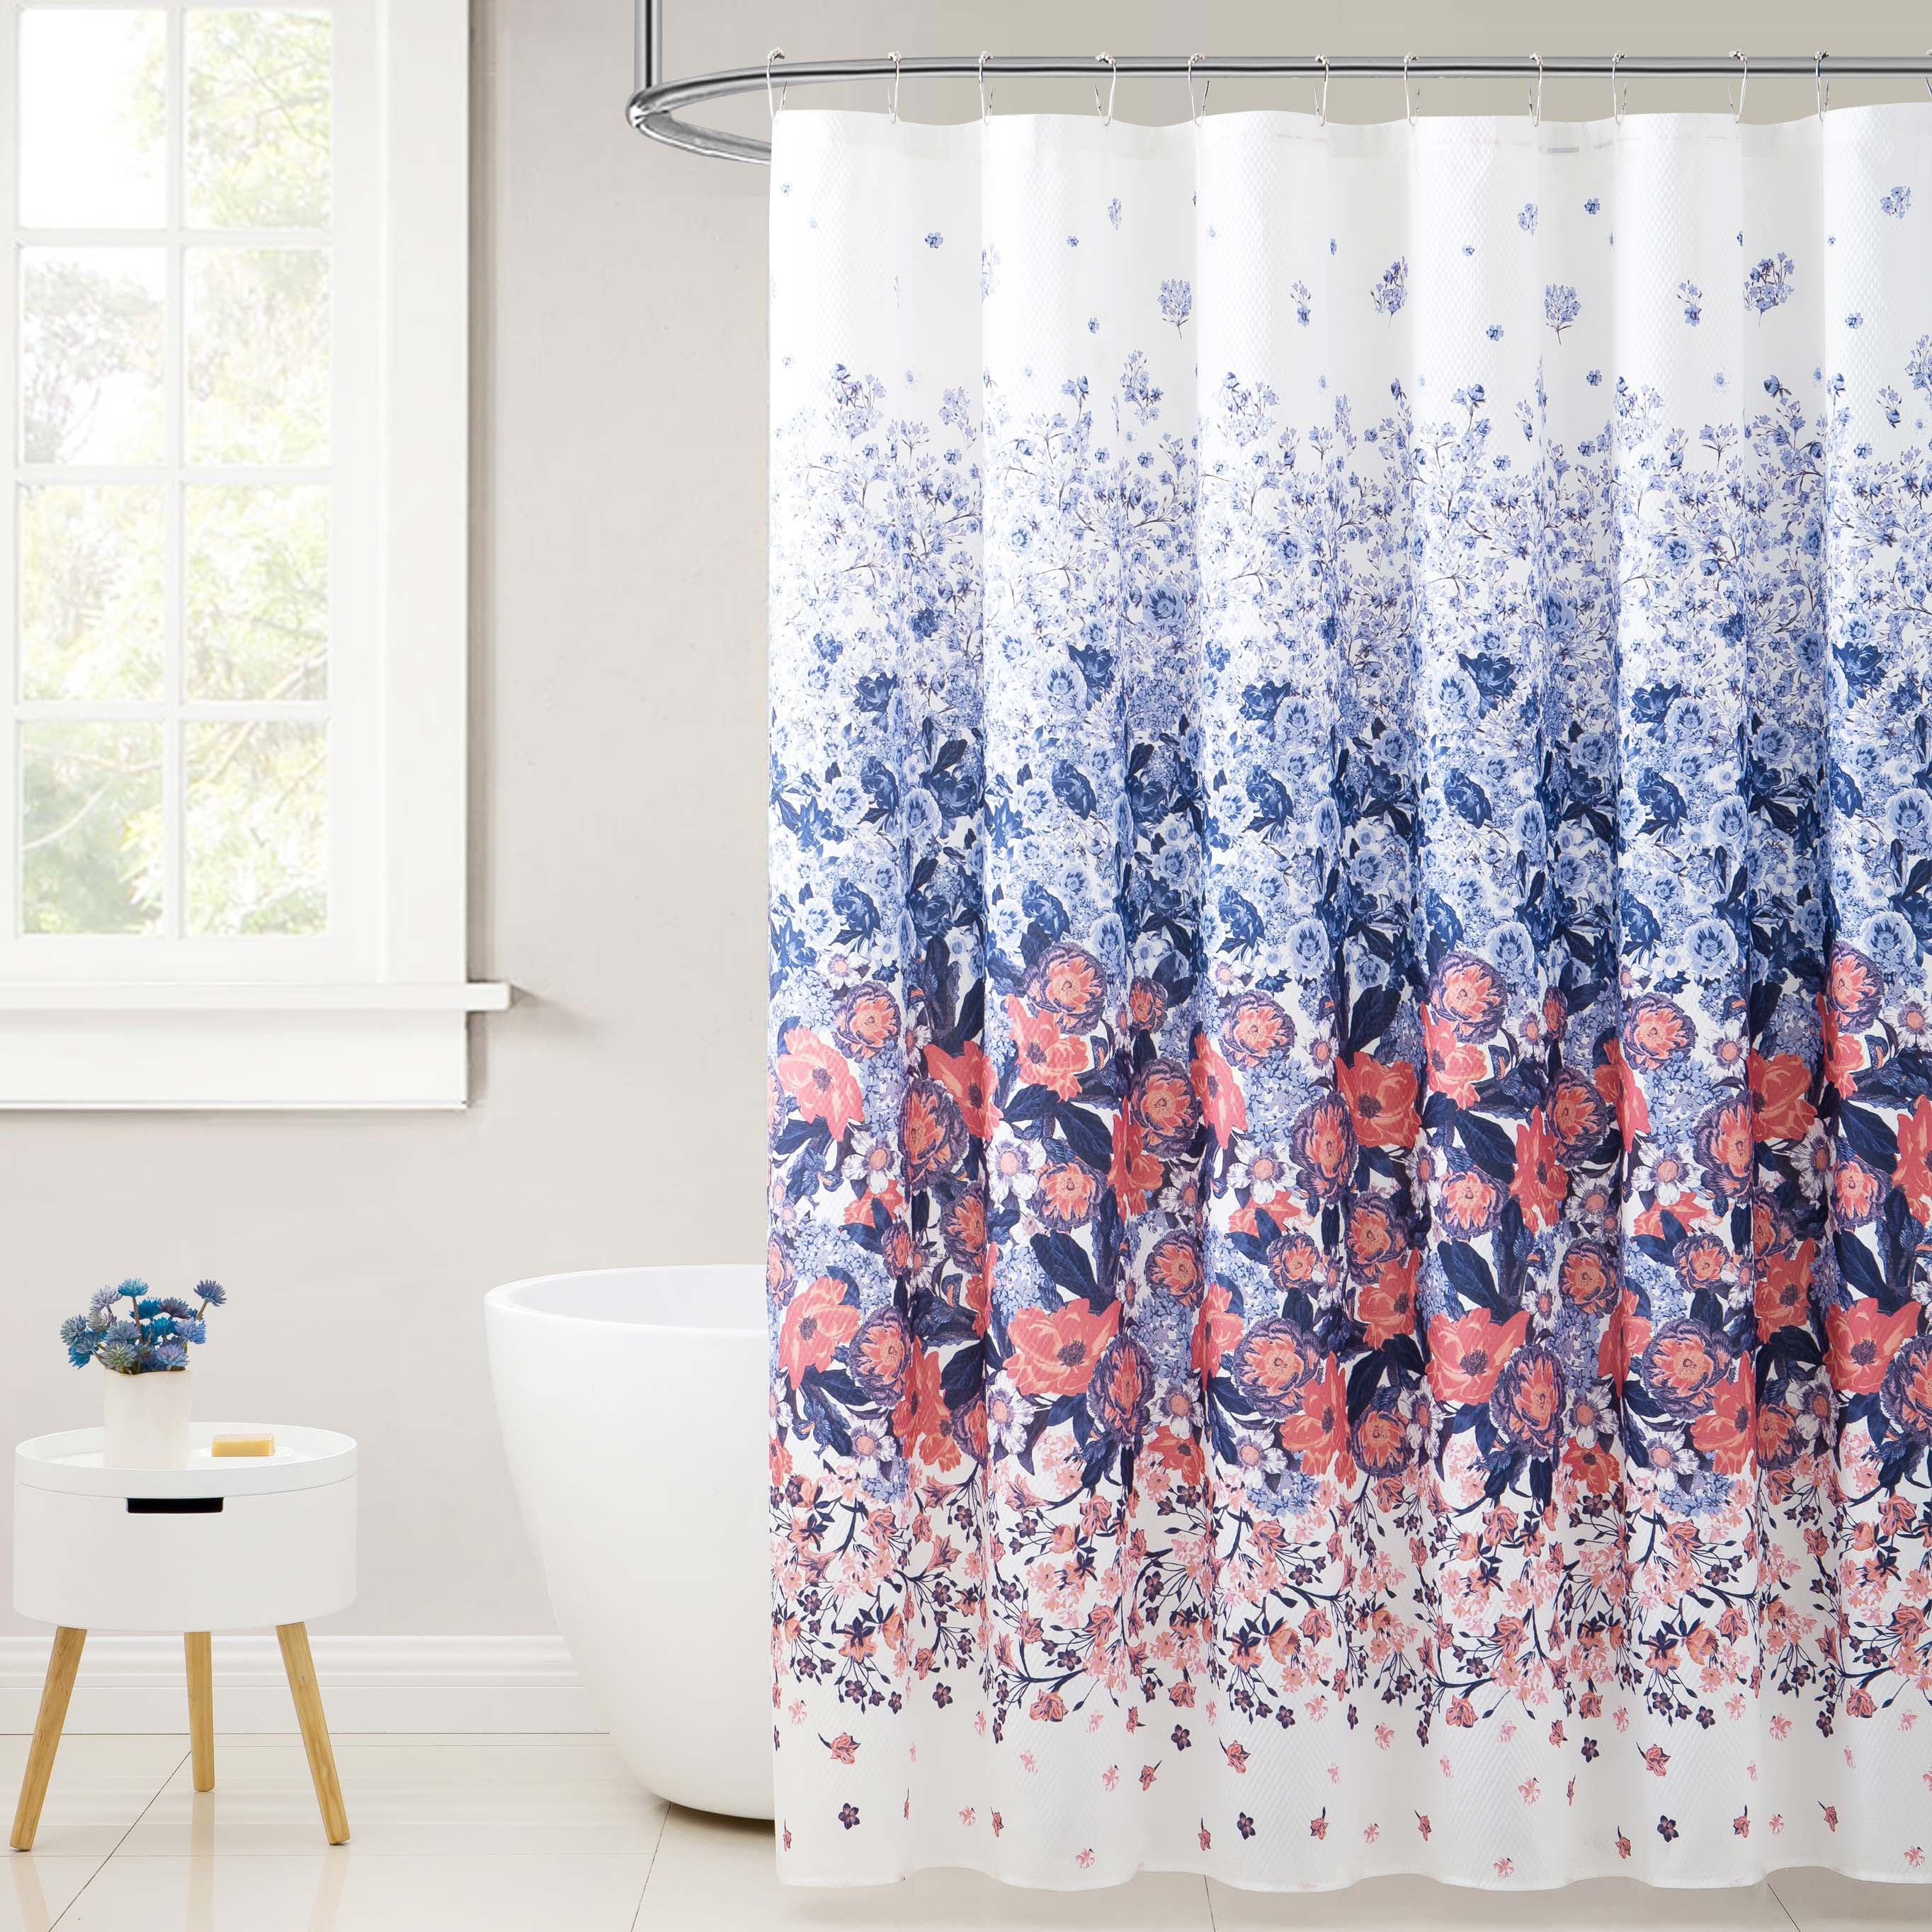 Fabric Shower Curtain for Bathroom White with Navy and Orange Coral ...